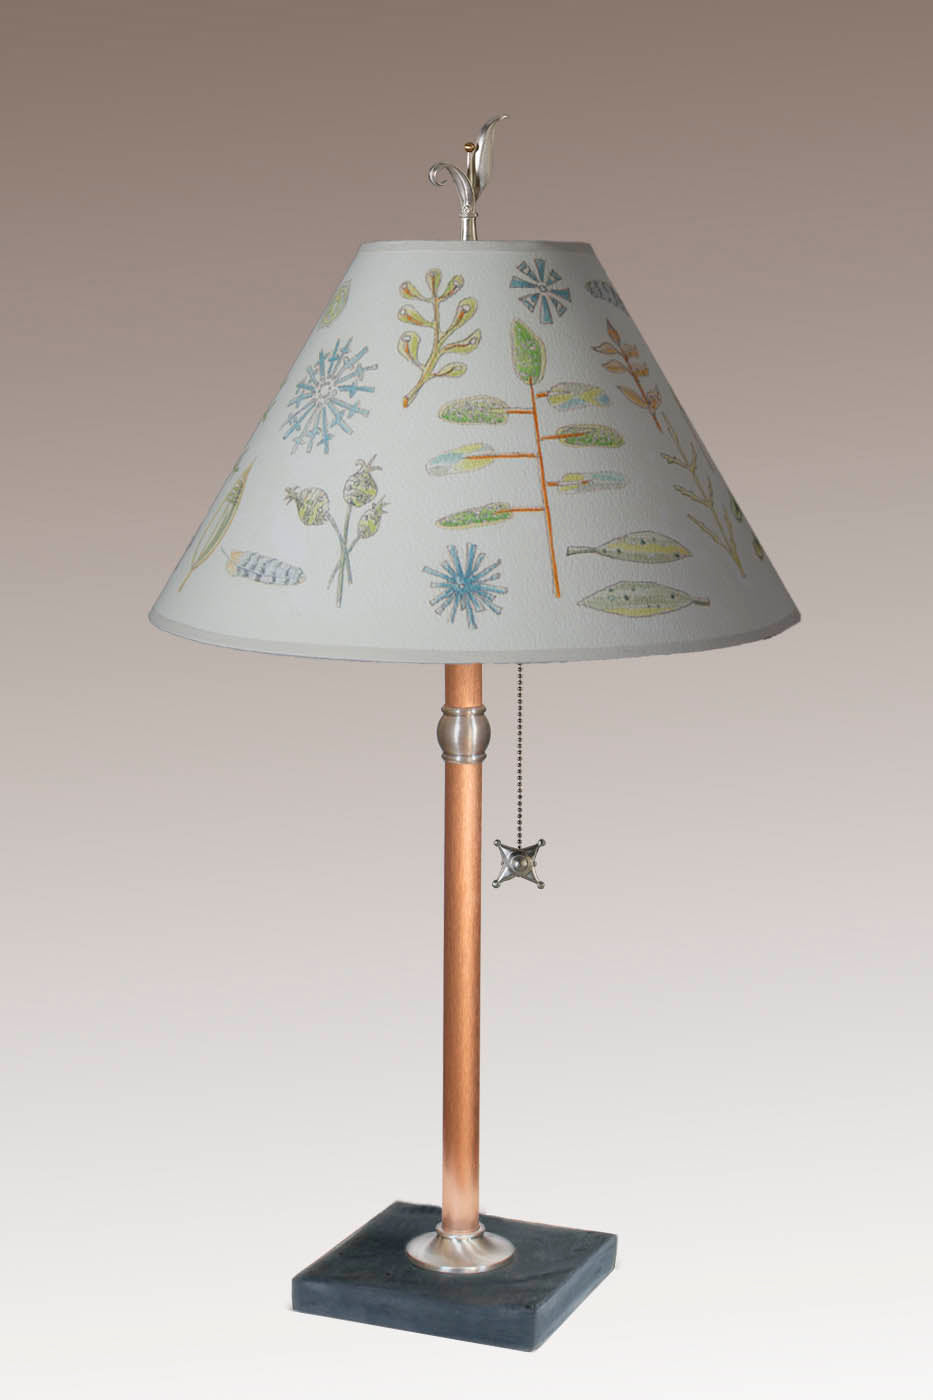 Janna Ugone &amp; Co Table Lamp Copper Table Lamp with Medium Conical Shade in Field Chart